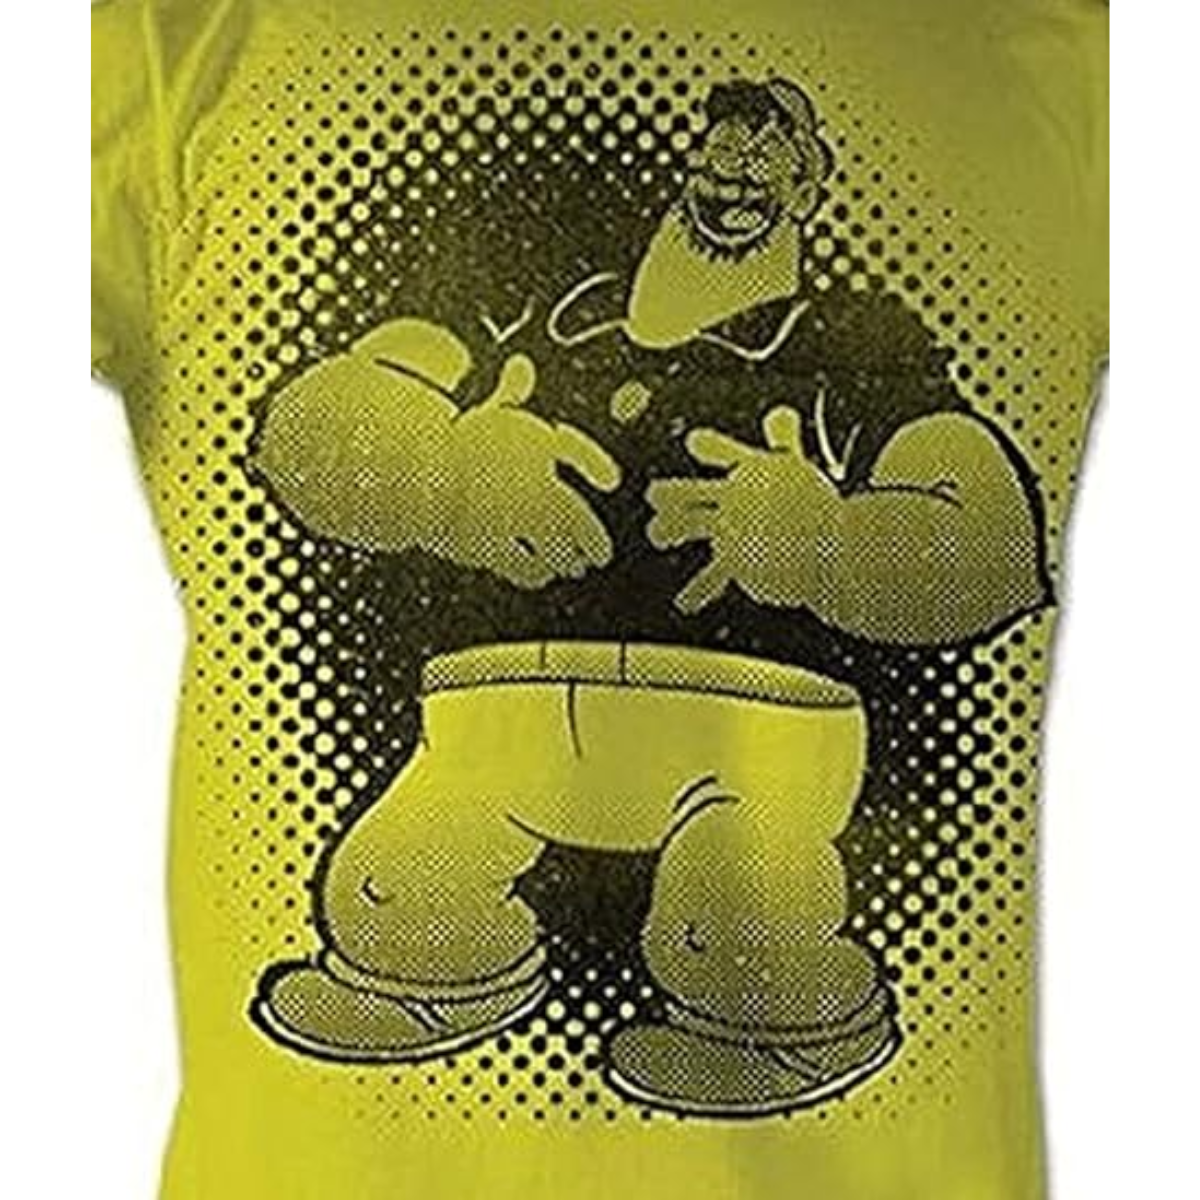 The Sailor Man Brutus Bluto Laughing Adult Yellow T-Shirt